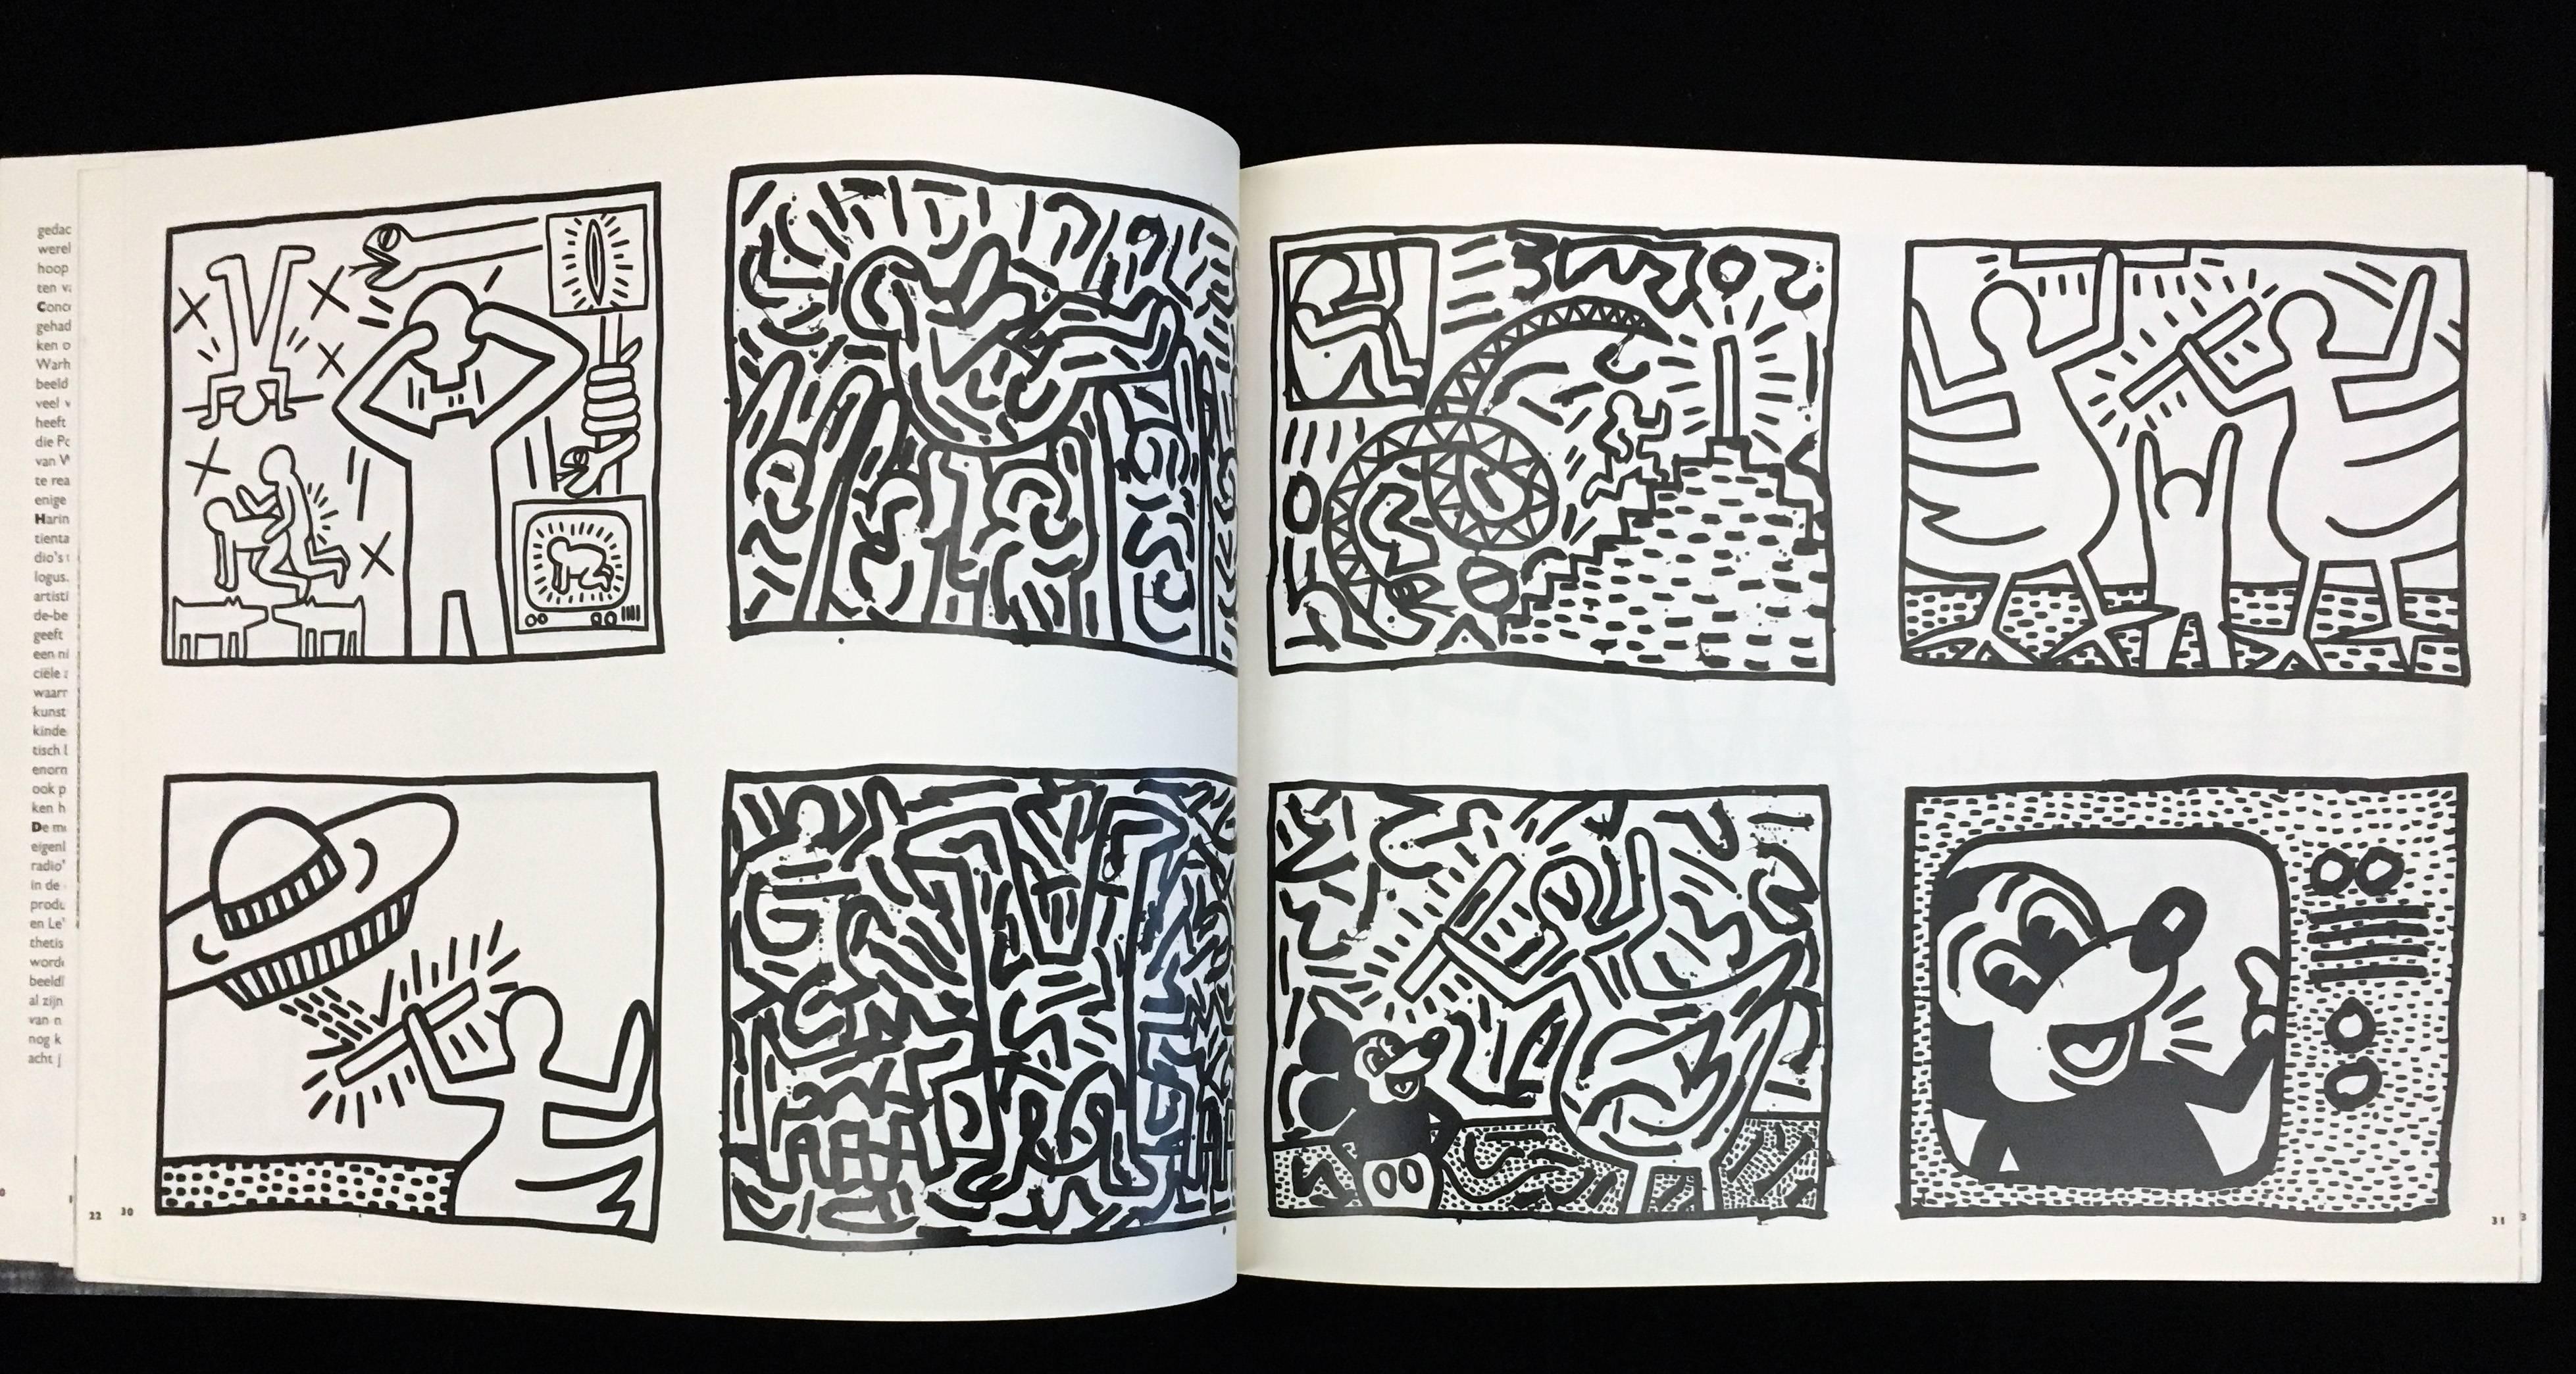 Keith Haring Stedelijk Museum drawing & catalogue (signed Keith Haring drawing)  For Sale 7